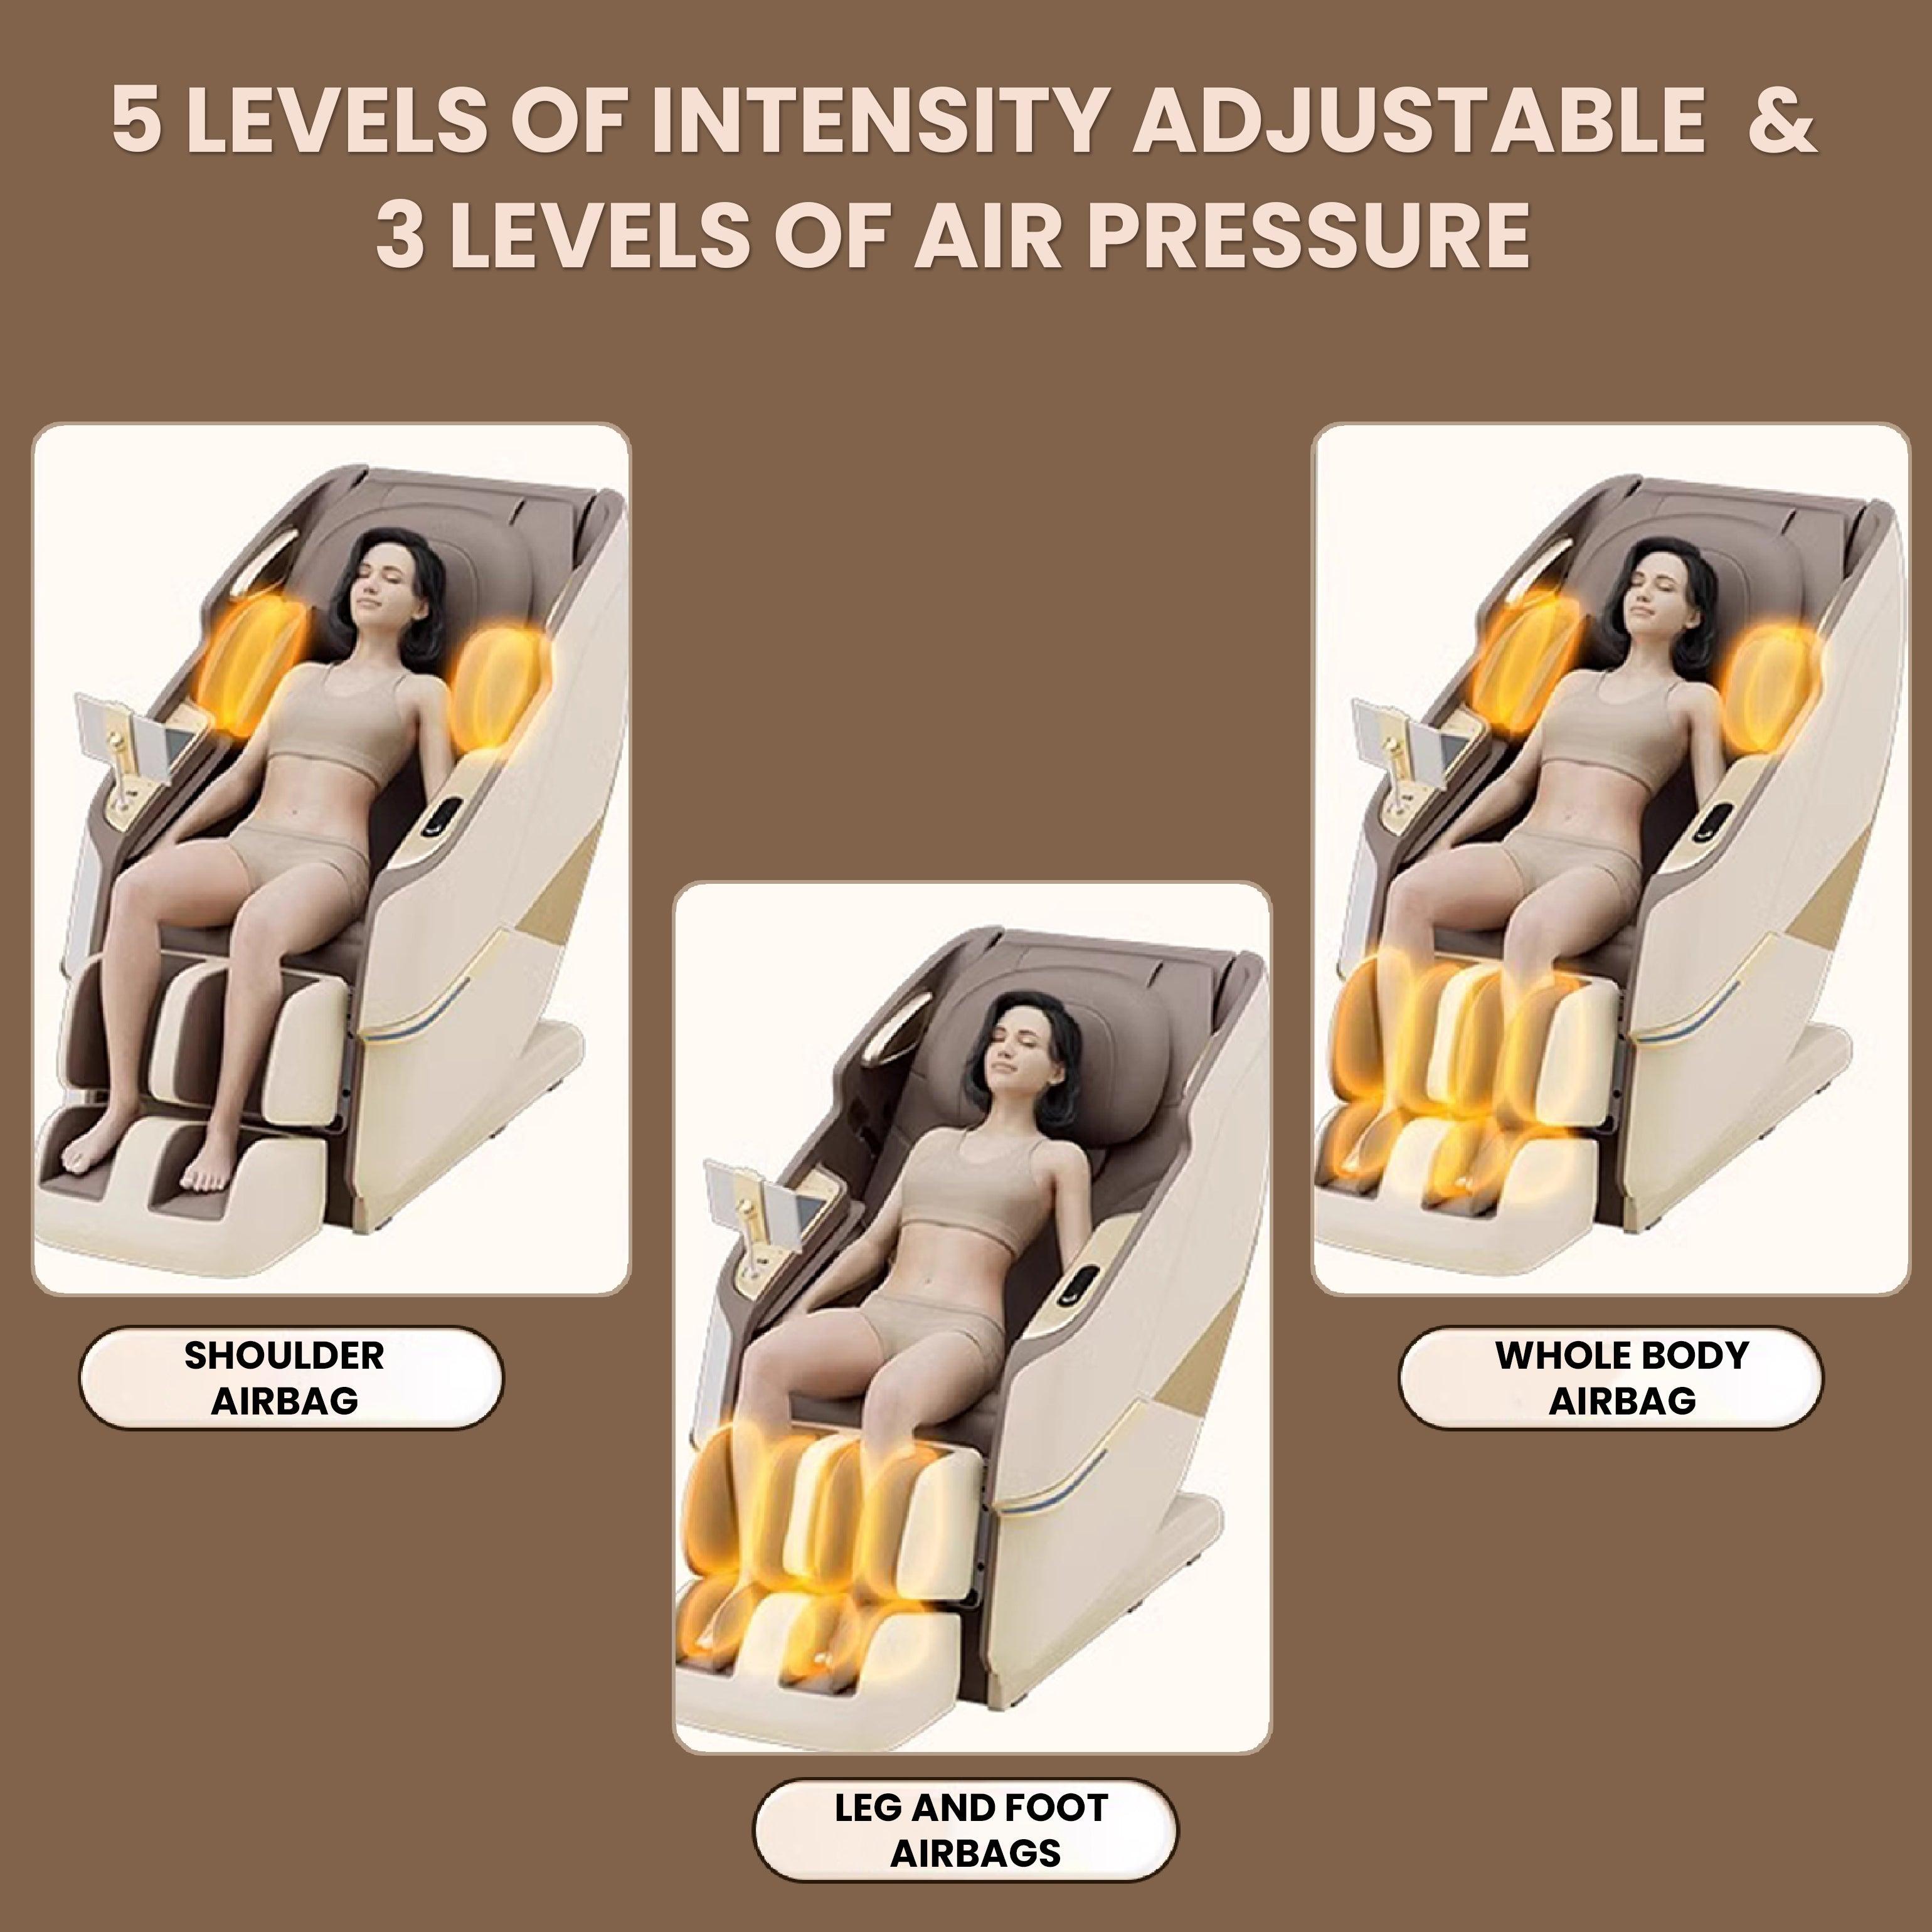 Best massage chair UAE with adjustable intensity, air pressure levels, shoulder, leg and foot airbags for ultimate relaxation.